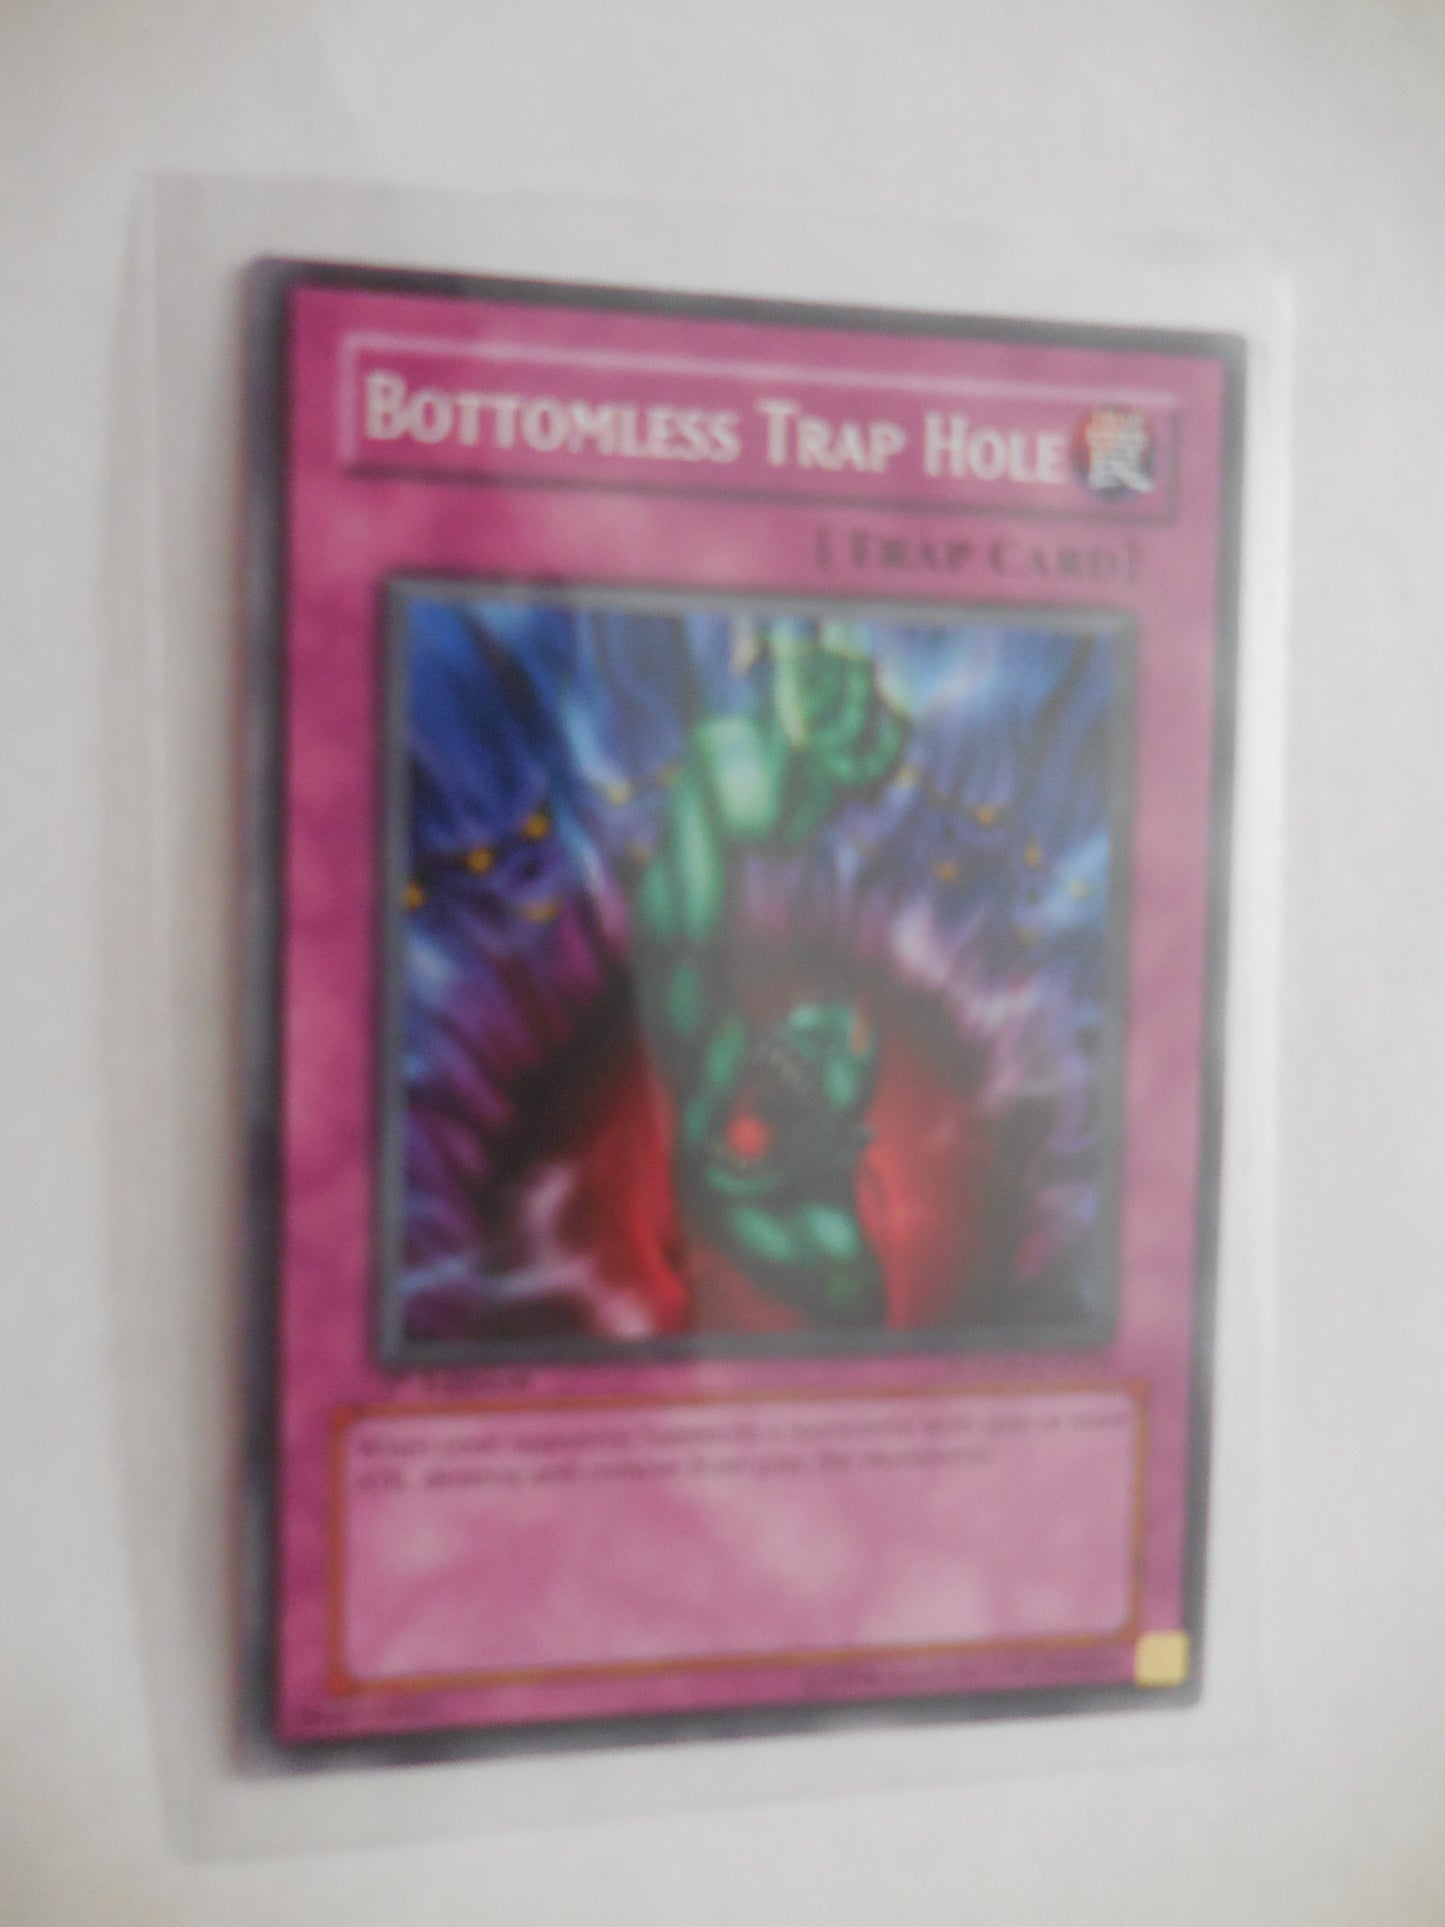 BOTTOMLESS TRAP HOLE COMMON 1ST EDITION